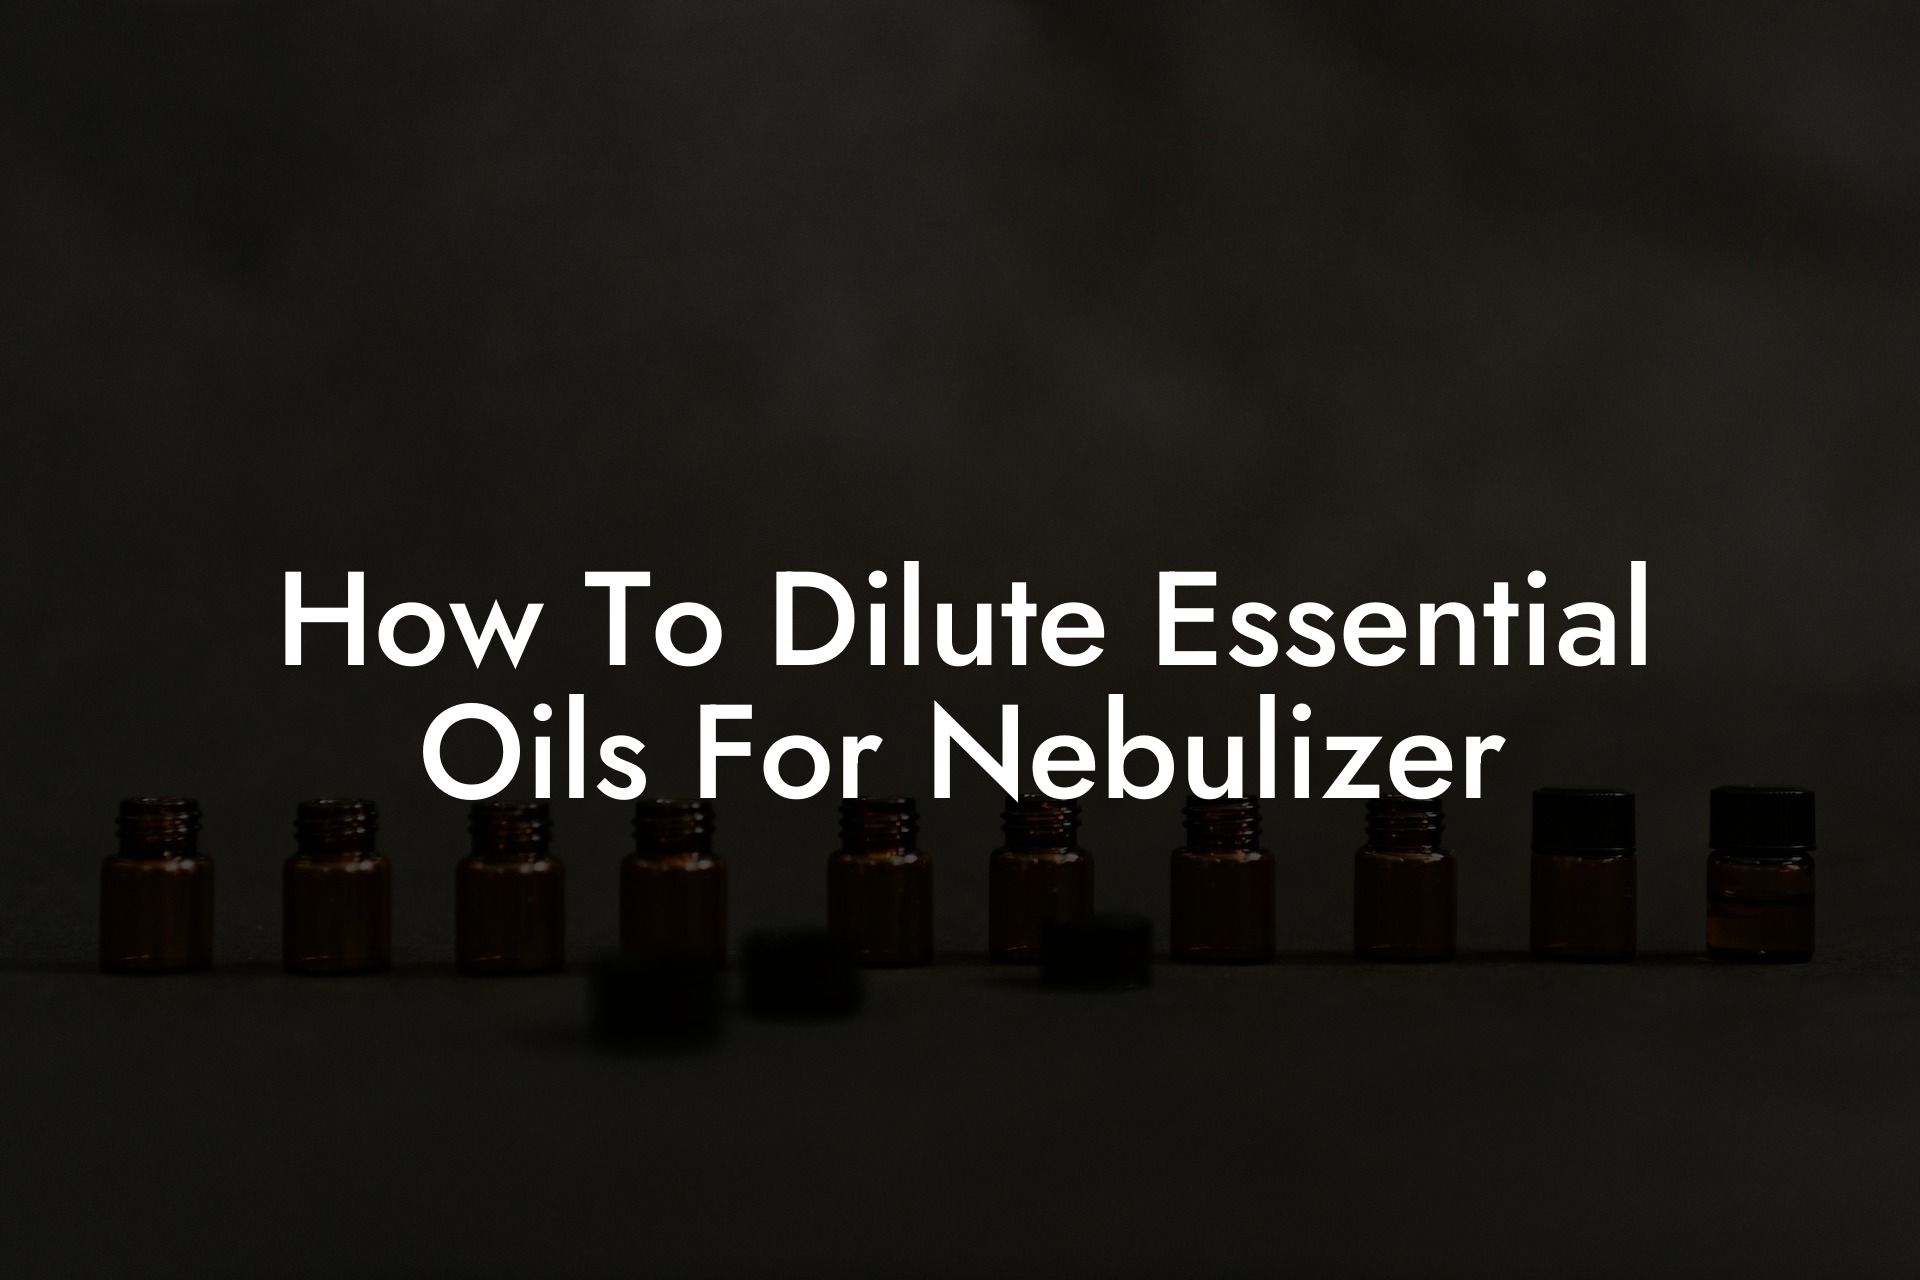 How To Dilute Essential Oils For Nebulizer